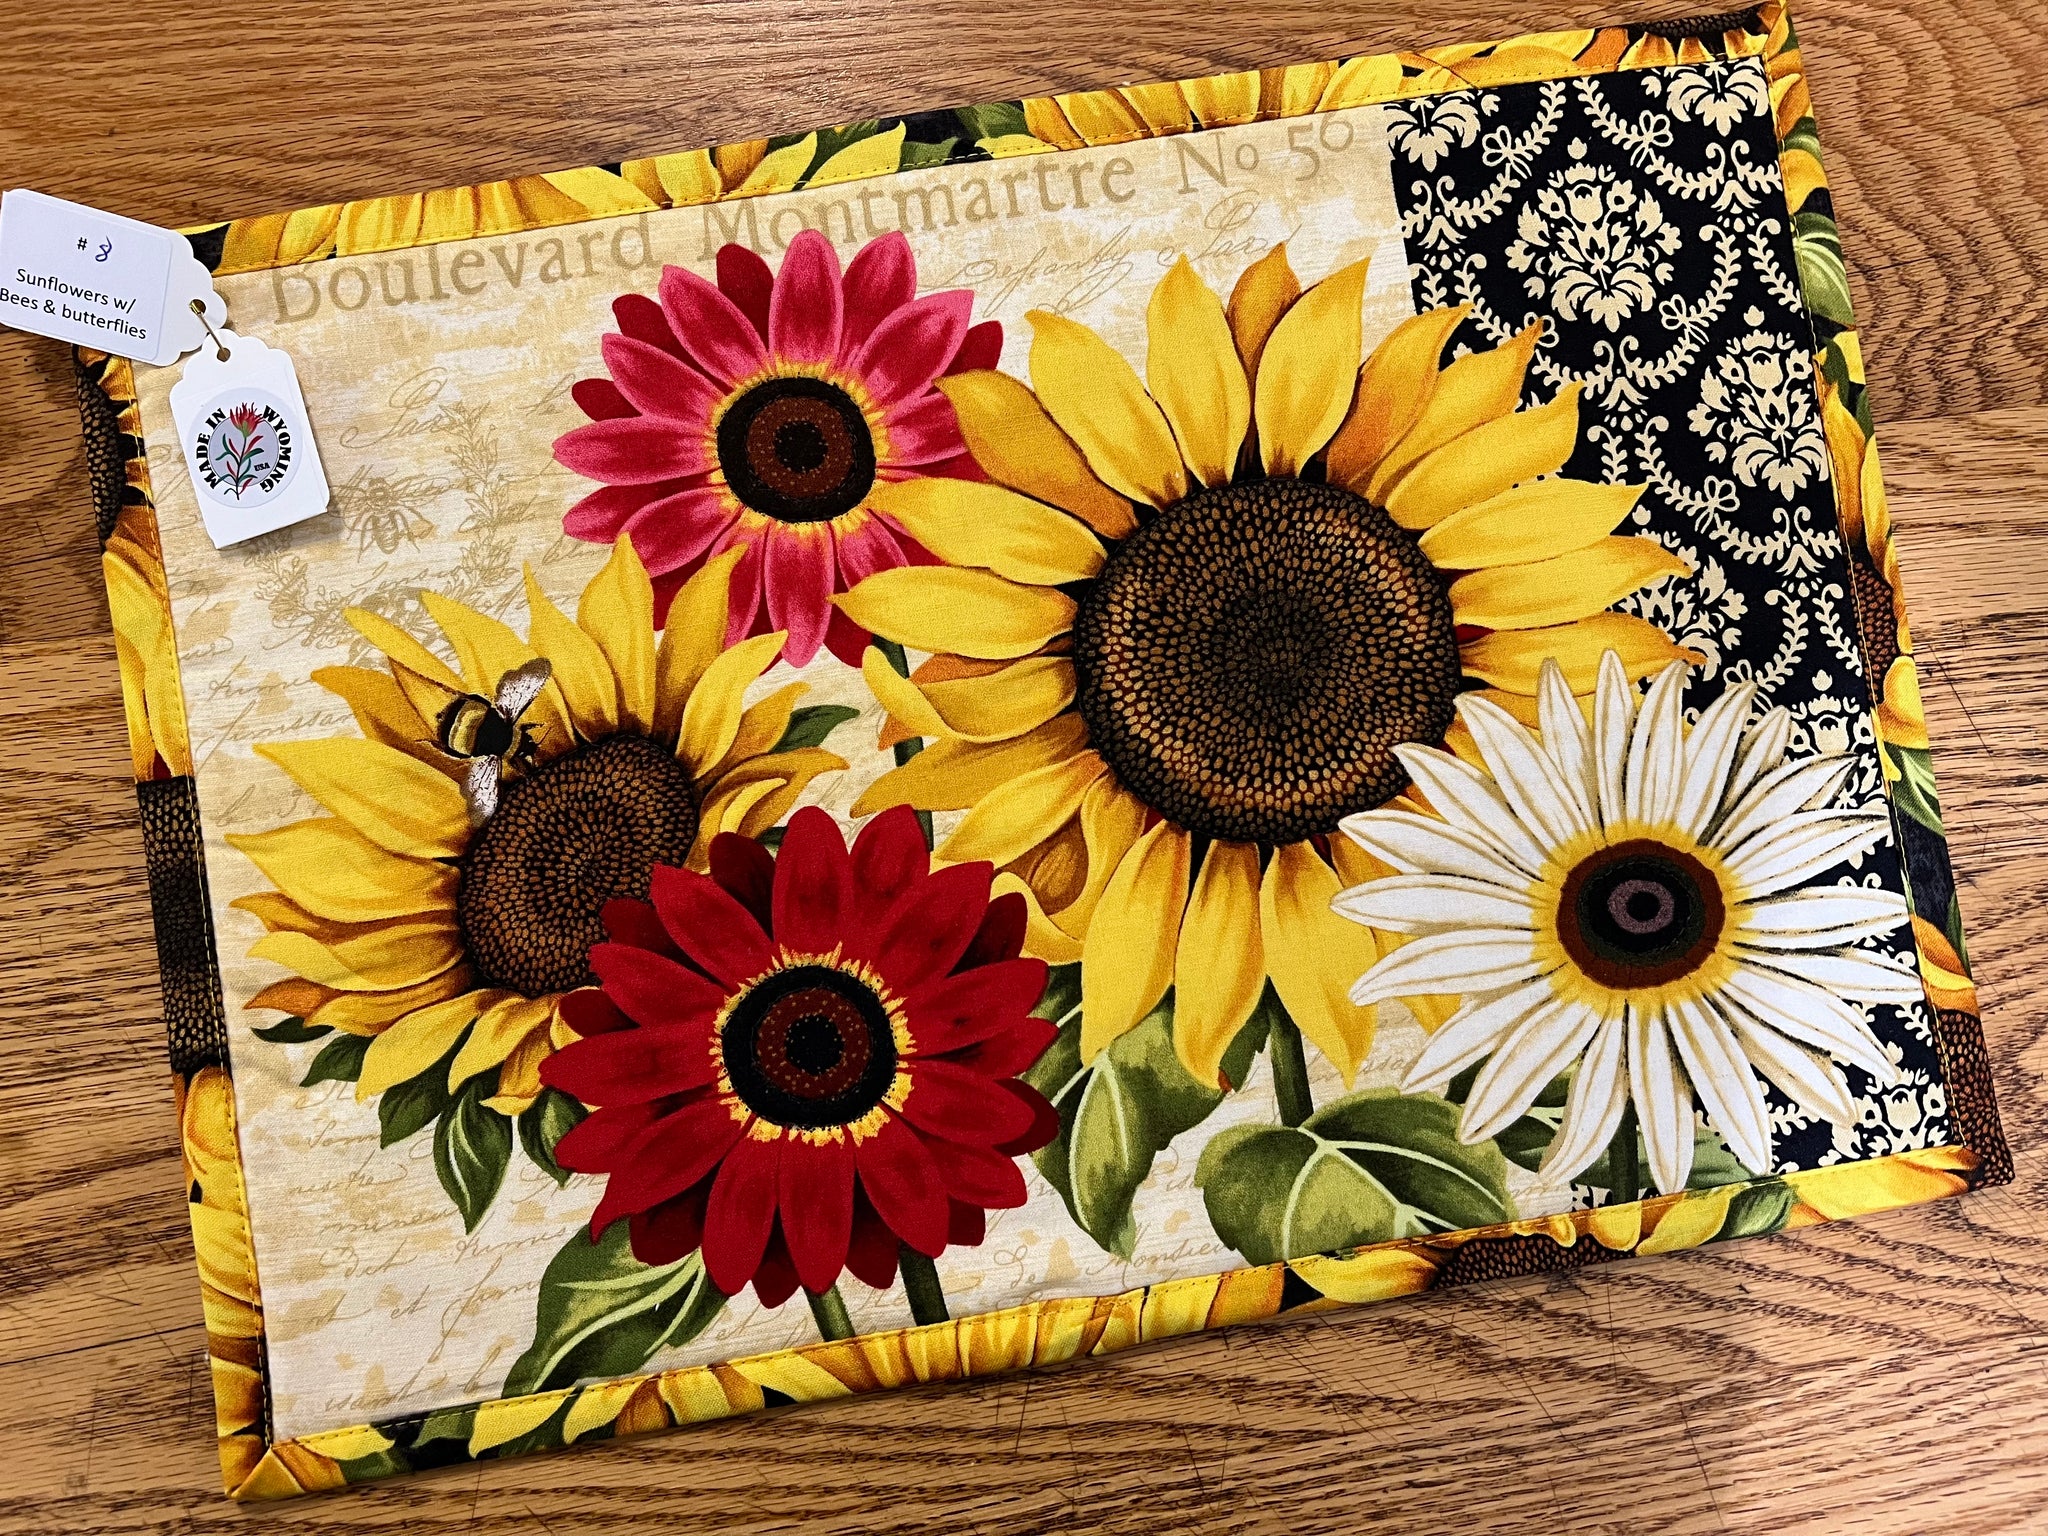 CHRIS' CREATIONS Sunflowers with Bees & Butterflies Placemats